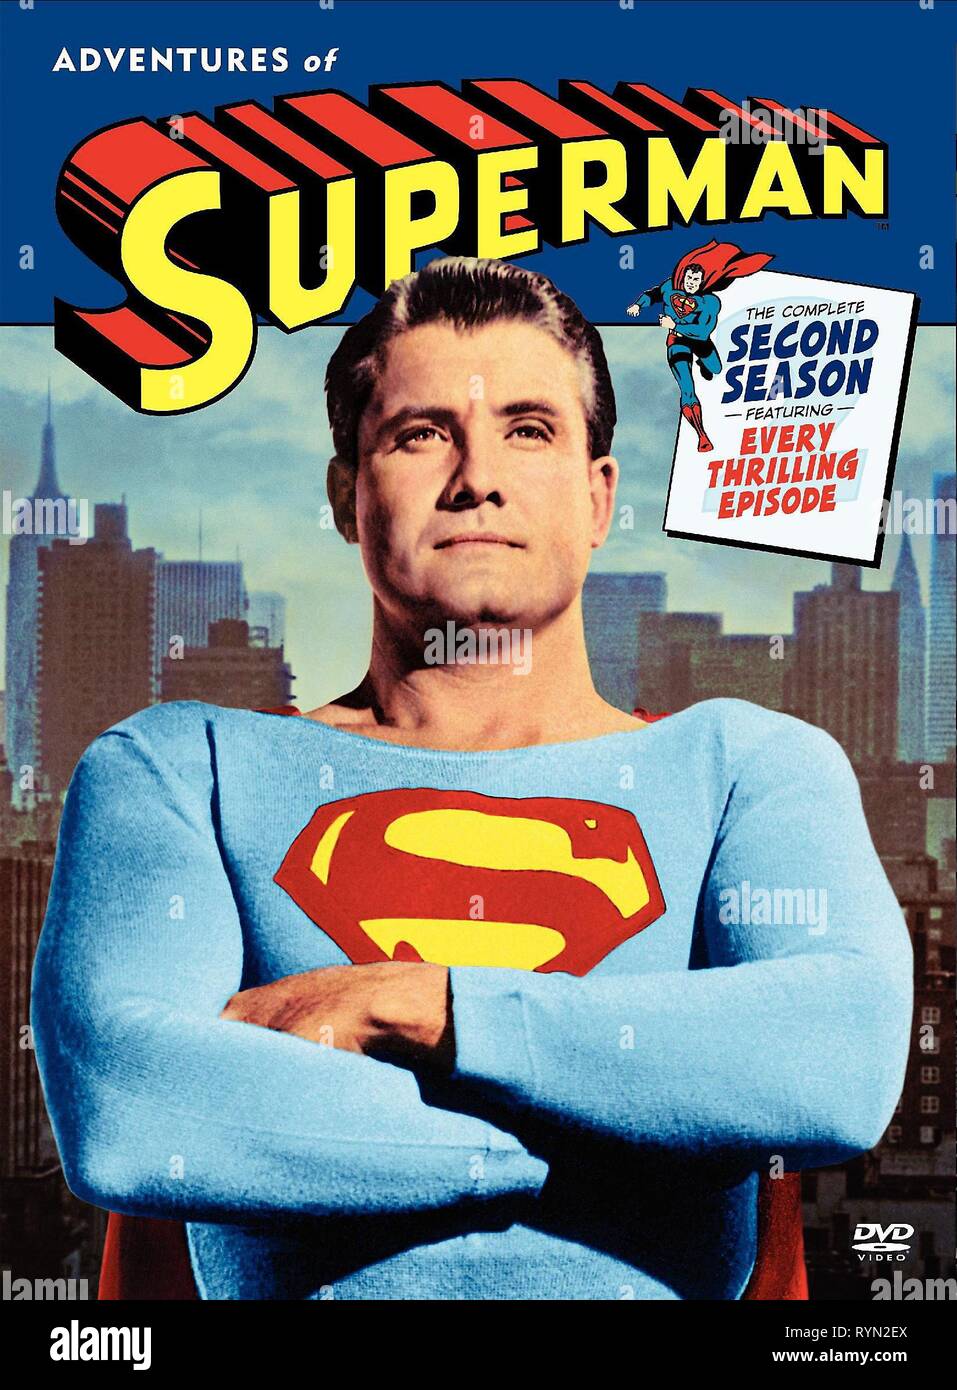 GEORGE REEVES POSTER, ADVENTURES OF SUPERMAN, 1952 Stock Photo